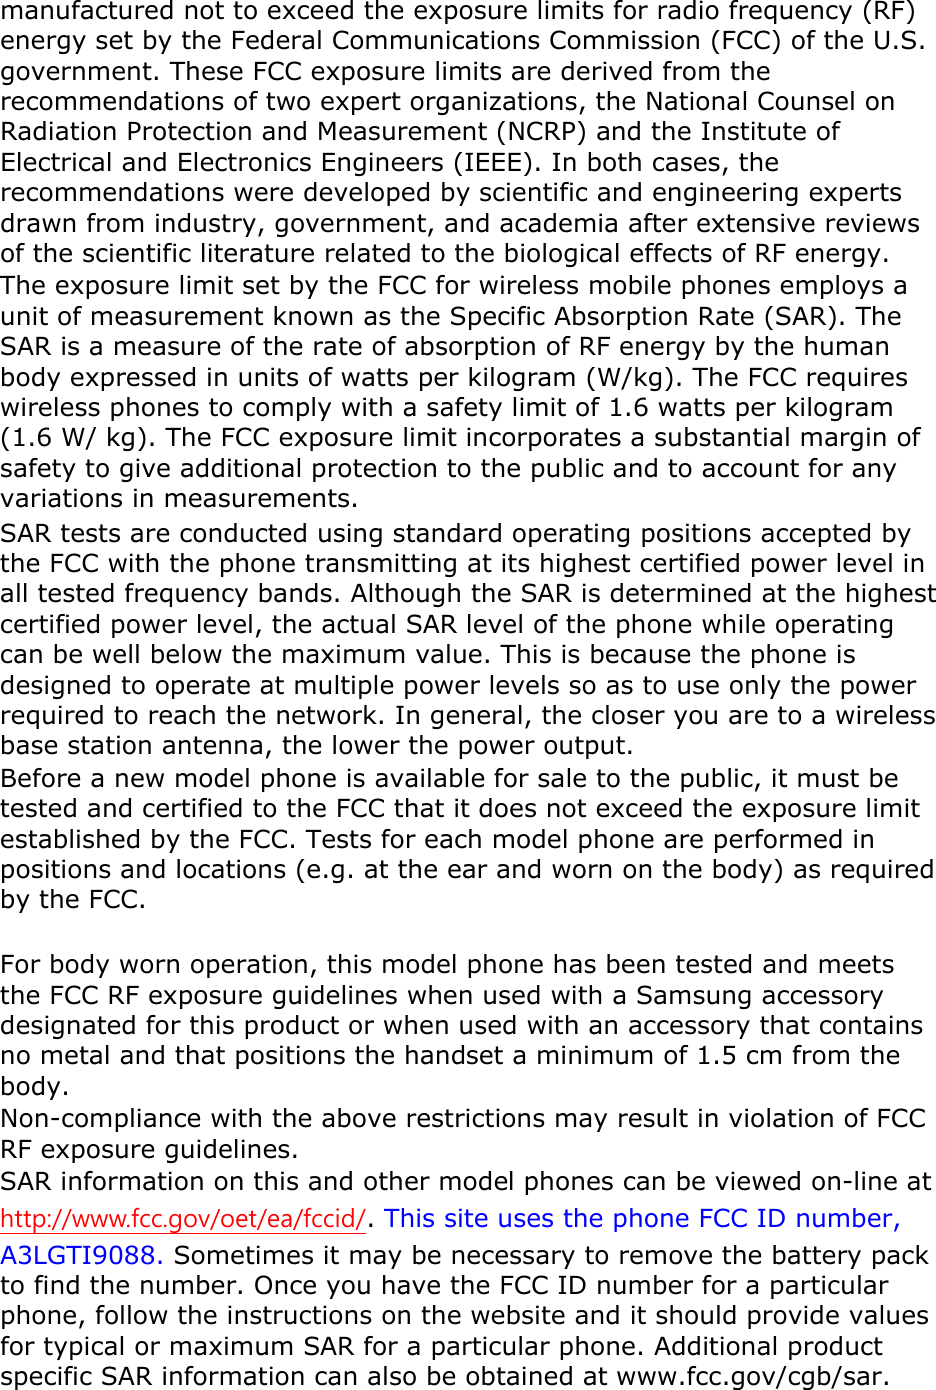 manufactured not to exceed the exposure limits for radio frequency (RF) energy set by the Federal Communications Commission (FCC) of the U.S. government. These FCC exposure limits are derived from the recommendations of two expert organizations, the National Counsel on Radiation Protection and Measurement (NCRP) and the Institute of Electrical and Electronics Engineers (IEEE). In both cases, the recommendations were developed by scientific and engineering experts drawn from industry, government, and academia after extensive reviews of the scientific literature related to the biological effects of RF energy. The exposure limit set by the FCC for wireless mobile phones employs a unit of measurement known as the Specific Absorption Rate (SAR). The SAR is a measure of the rate of absorption of RF energy by the human body expressed in units of watts per kilogram (W/kg). The FCC requires wireless phones to comply with a safety limit of 1.6 watts per kilogram (1.6 W/ kg). The FCC exposure limit incorporates a substantial margin of safety to give additional protection to the public and to account for any variations in measurements. SAR tests are conducted using standard operating positions accepted by the FCC with the phone transmitting at its highest certified power level in all tested frequency bands. Although the SAR is determined at the highest certified power level, the actual SAR level of the phone while operating can be well below the maximum value. This is because the phone is designed to operate at multiple power levels so as to use only the power required to reach the network. In general, the closer you are to a wireless base station antenna, the lower the power output. Before a new model phone is available for sale to the public, it must be tested and certified to the FCC that it does not exceed the exposure limit established by the FCC. Tests for each model phone are performed in positions and locations (e.g. at the ear and worn on the body) as required by the FCC.      For body worn operation, this model phone has been tested and meets the FCC RF exposure guidelines when used with a Samsung accessory designated for this product or when used with an accessory that contains no metal and that positions the handset a minimum of 1.5 cm from the body.  Non-compliance with the above restrictions may result in violation of FCC RF exposure guidelines. SAR information on this and other model phones can be viewed on-line at http://www.fcc.gov/oet/ea/fccid/. This site uses the phone FCC ID number, A3LGTI9088. Sometimes it may be necessary to remove the battery pack to find the number. Once you have the FCC ID number for a particular phone, follow the instructions on the website and it should provide values for typical or maximum SAR for a particular phone. Additional product specific SAR information can also be obtained at www.fcc.gov/cgb/sar. 